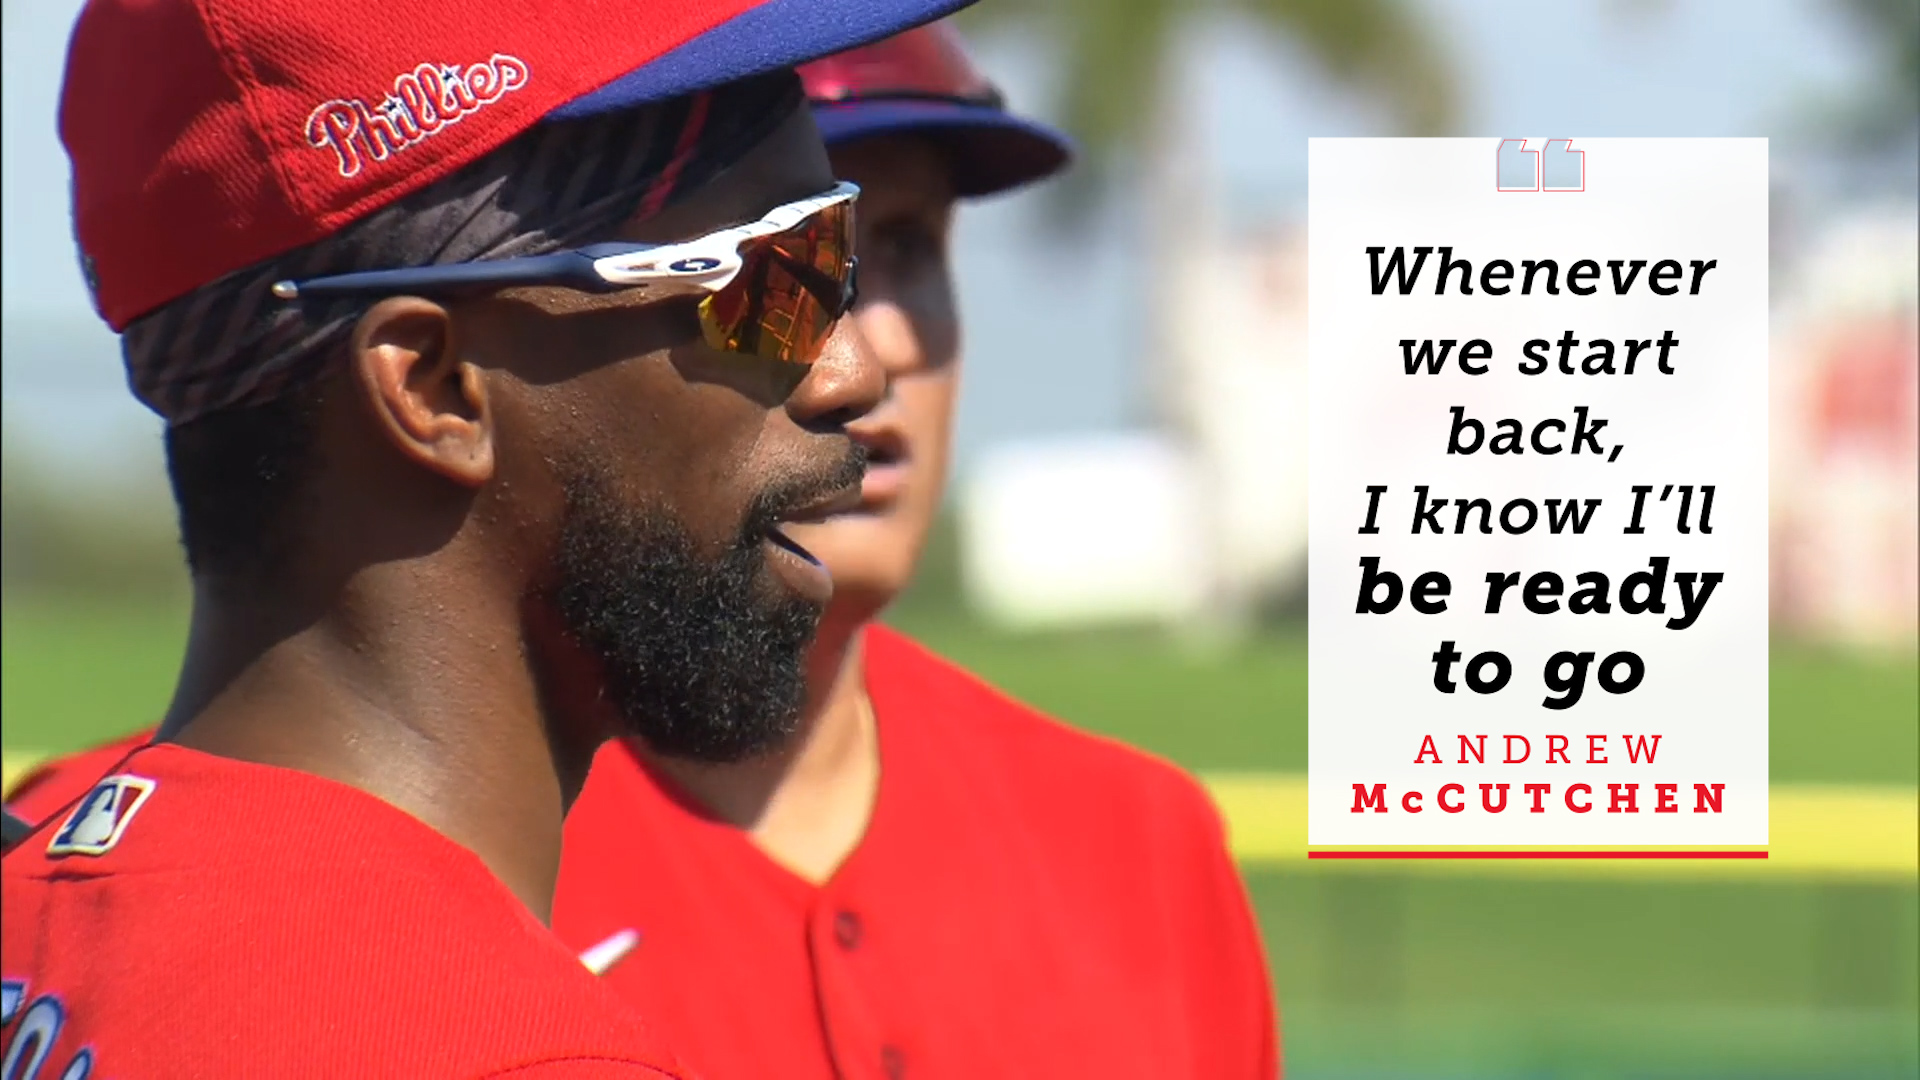 Andrew McCutchen introduces us to Uncle Larry